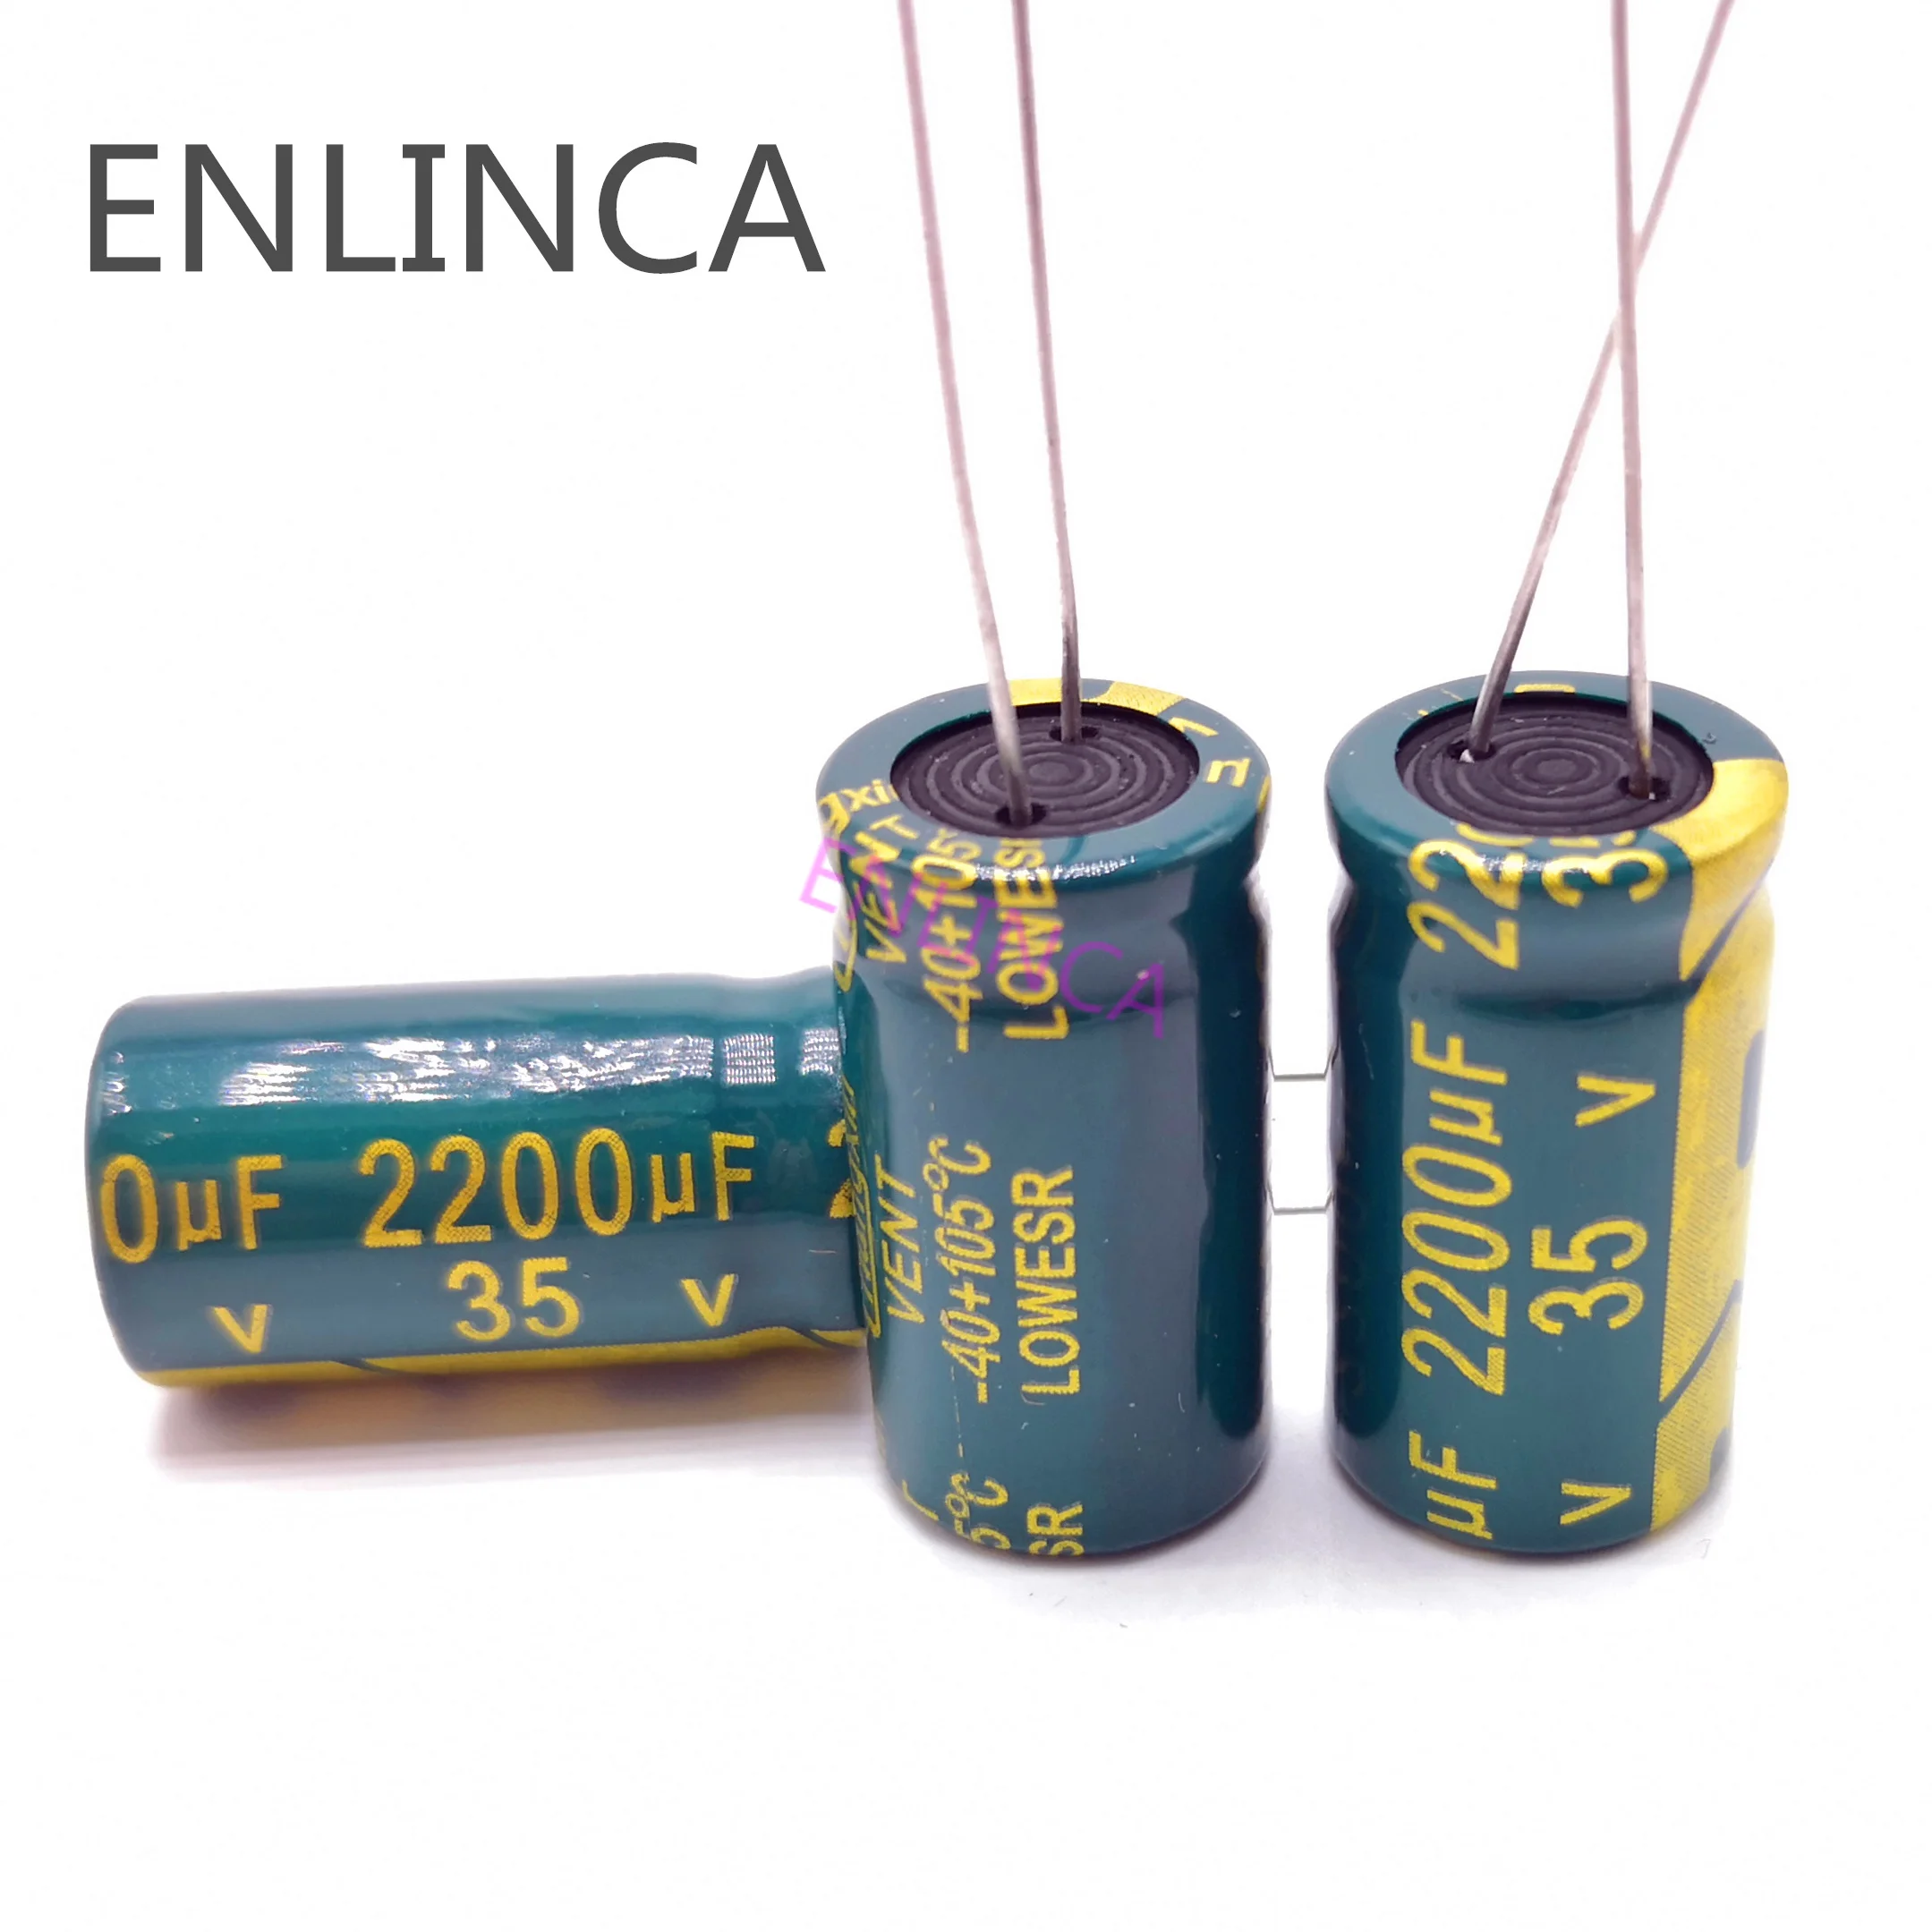 

12pcs/lot H205 Low ESR/Impedance high frequency 35v 2200UF aluminum electrolytic capacitor size 13*25 2200UF35V 20%